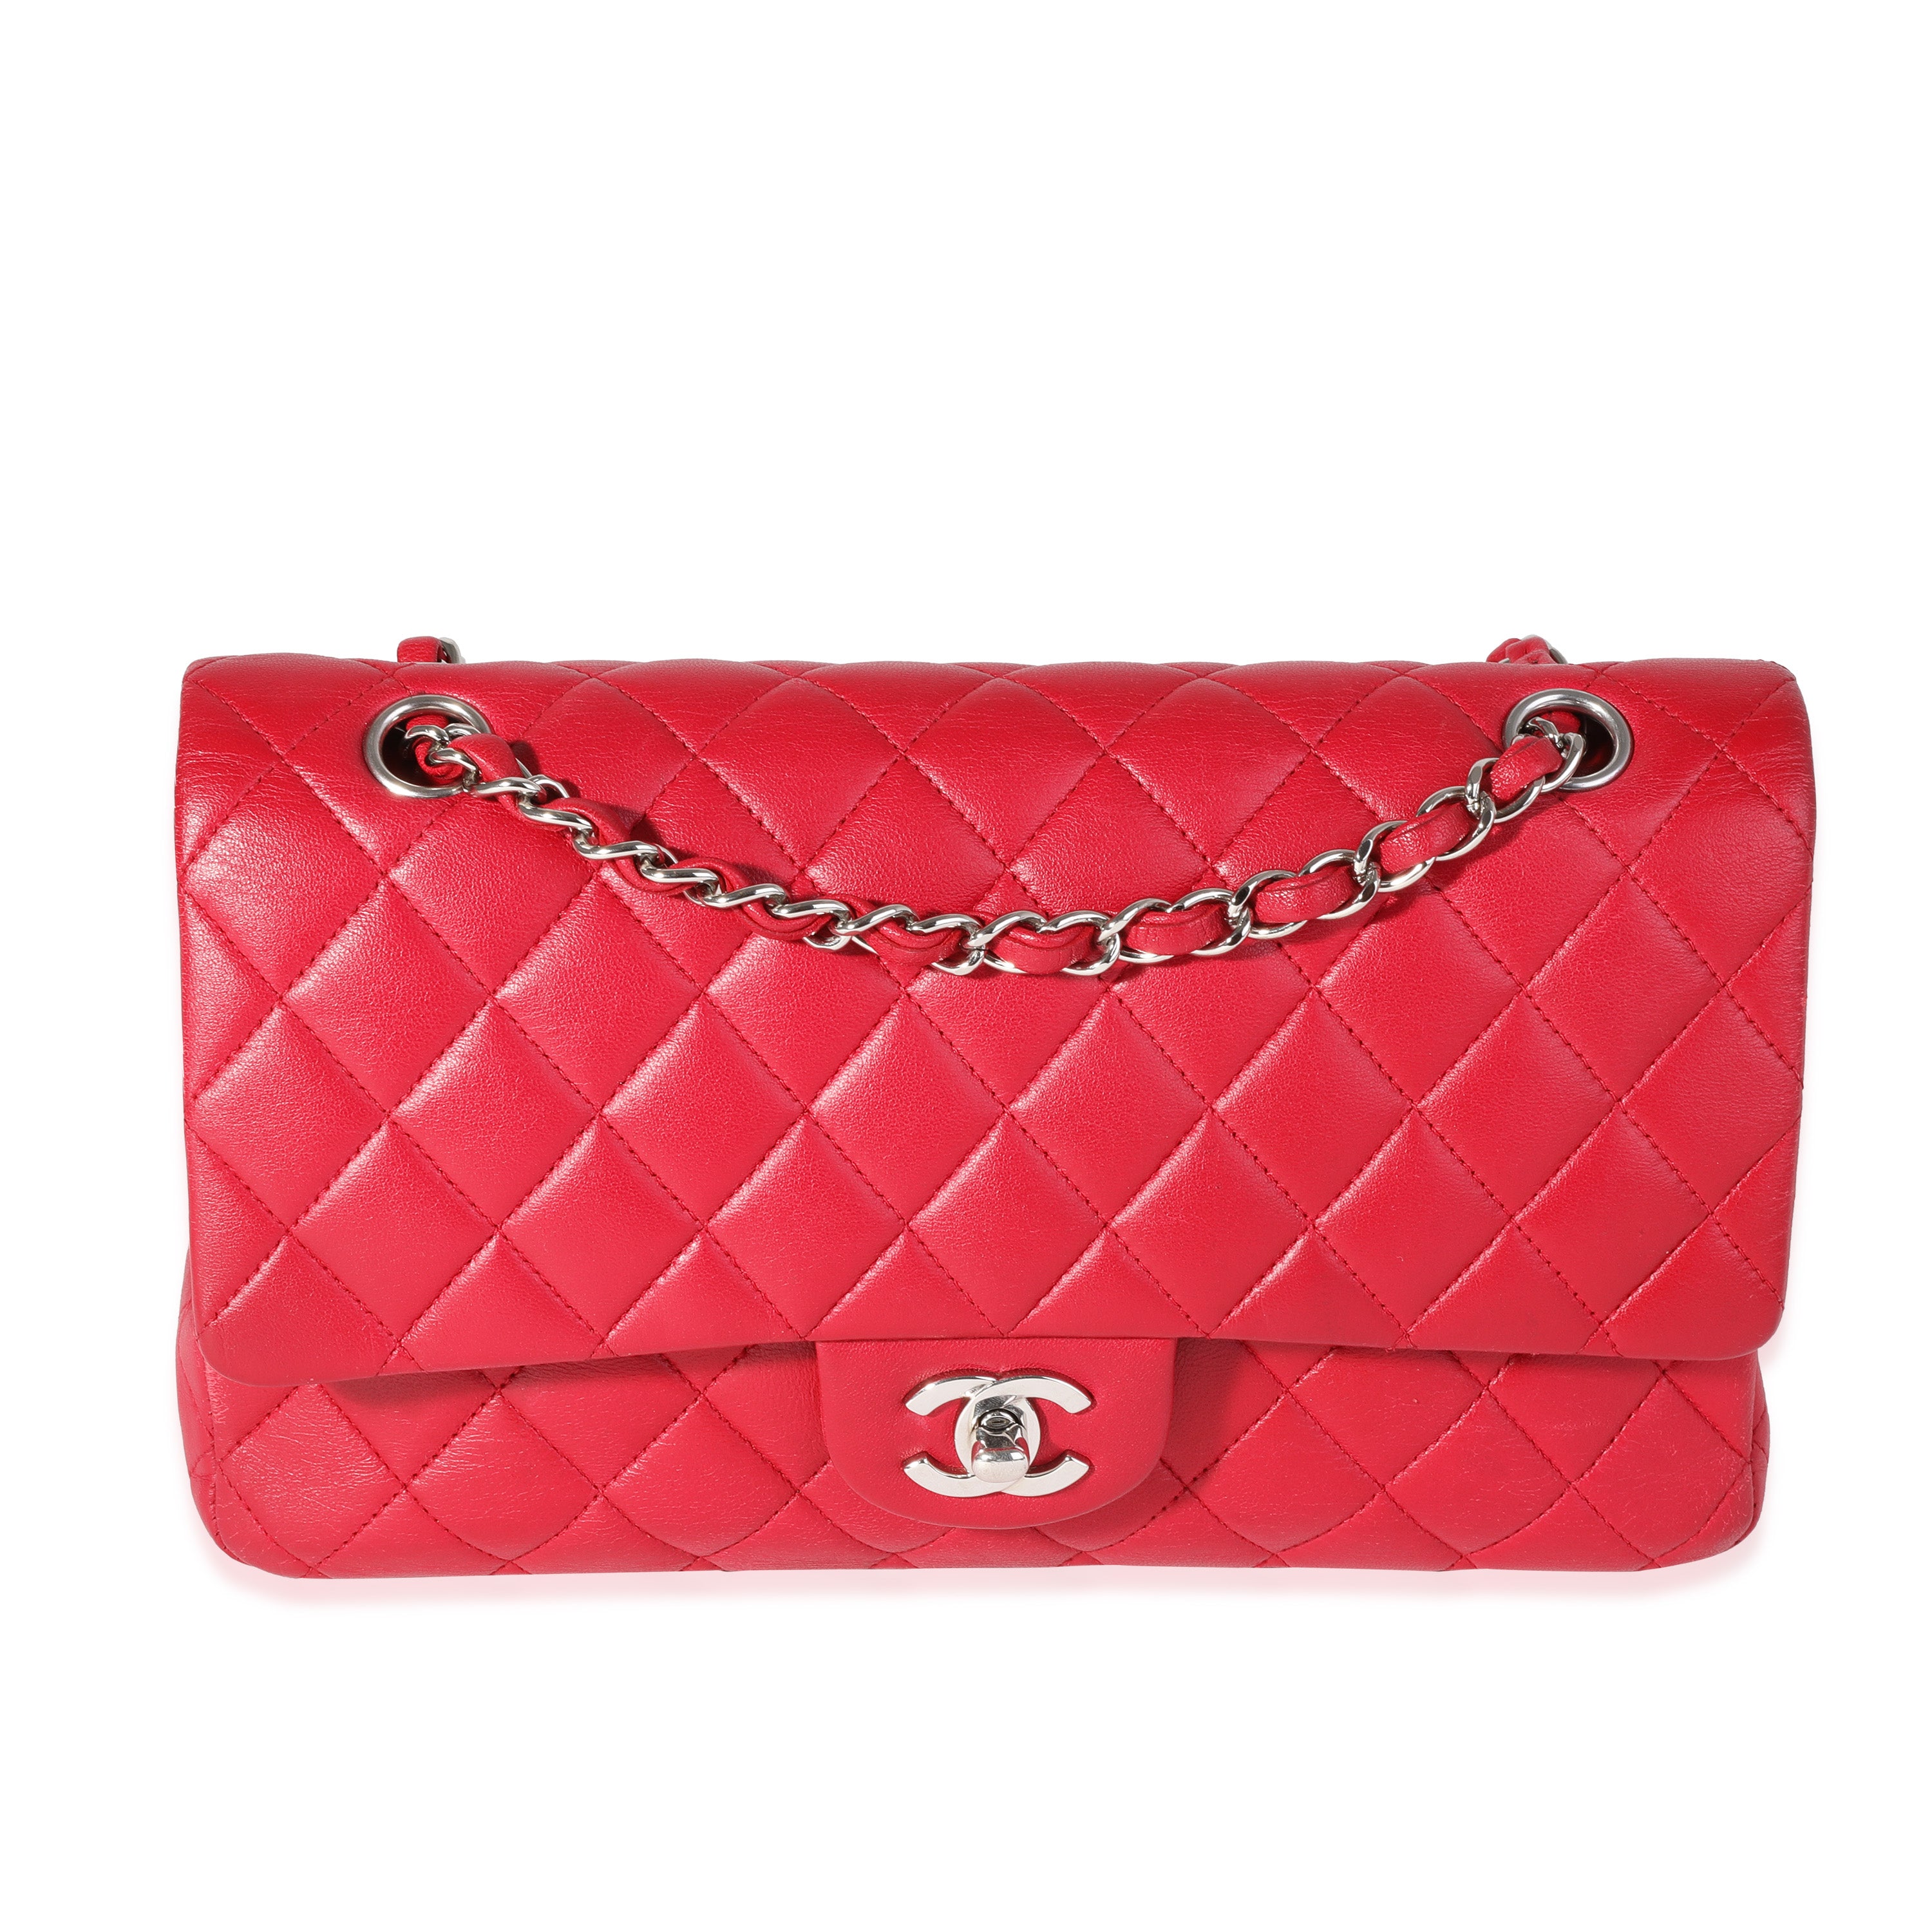 Chanel Periwinkle Quilted Lambskin Medium Classic Double Flap, myGemma, QA